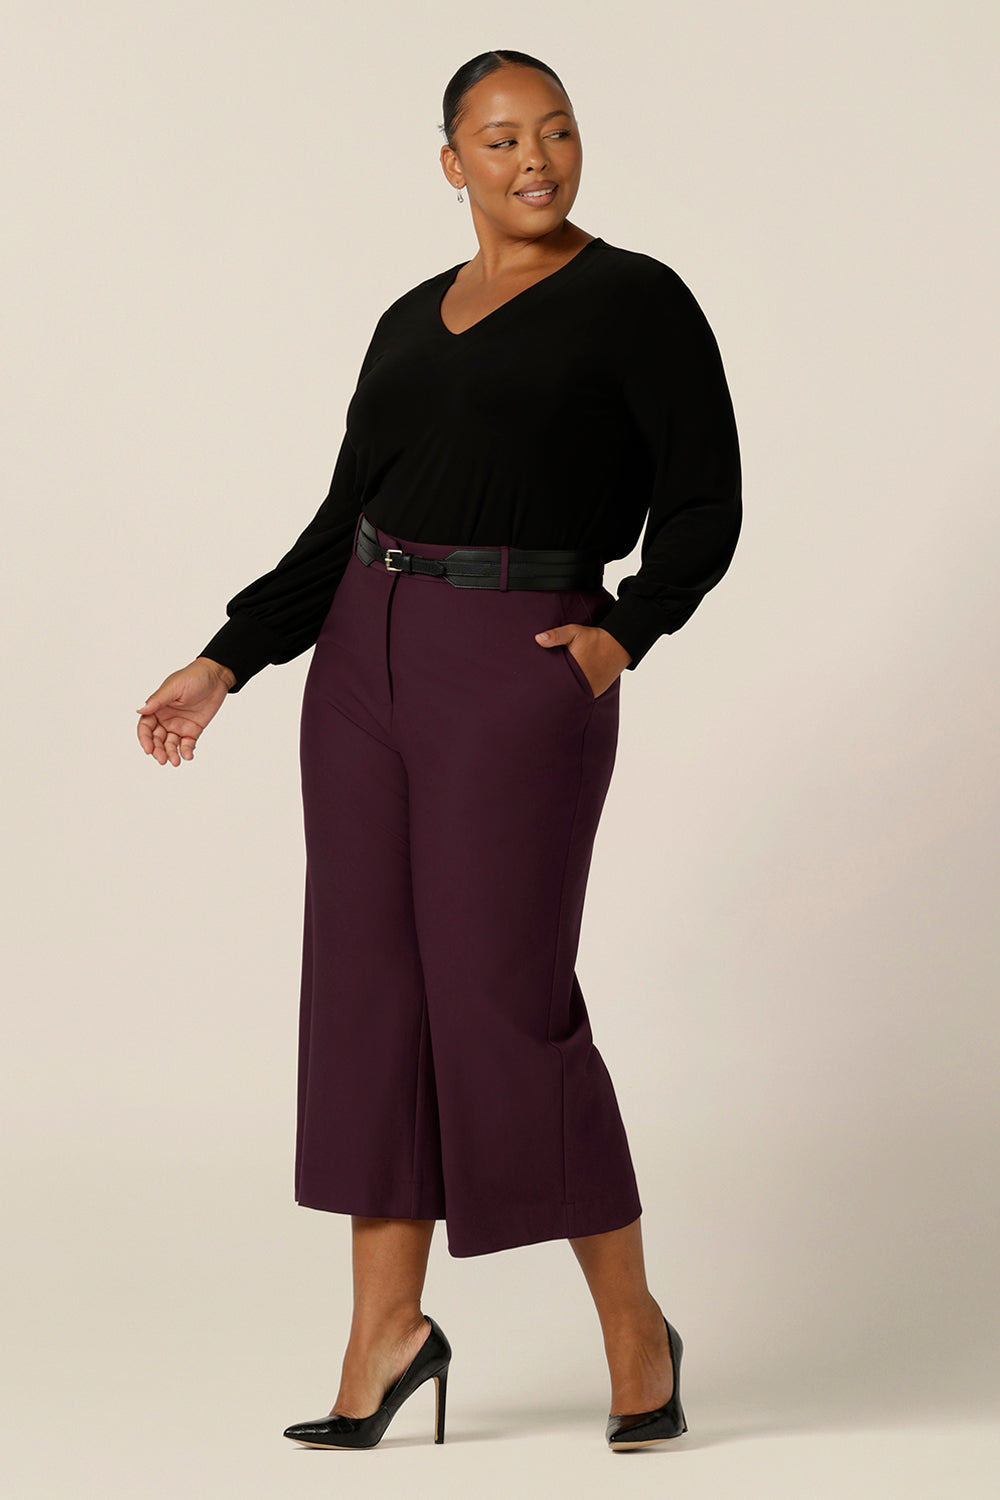 Modern workwear trousers - a size 18, curvy woman wears wide leg, cropped length, tailored pants in Mulberry ponte jersey with a long sleeve, V neck top in black jersey. Made in Australia by Australian and New Zealand women's clothing label, L&F, these easy care pants work for corporate wear and weekend wear